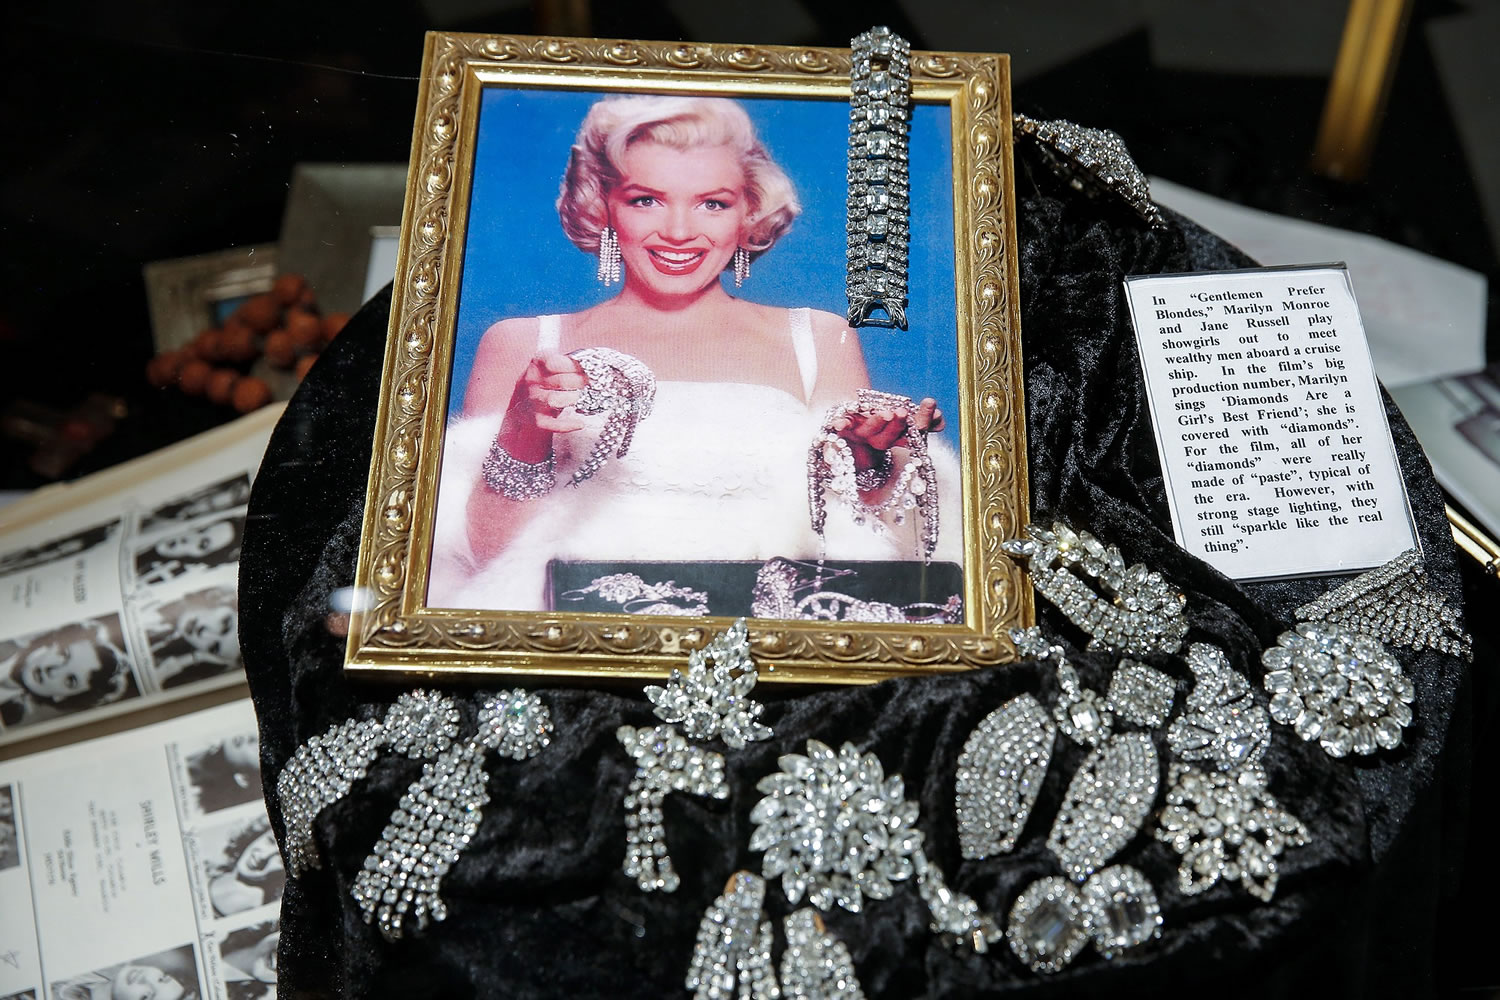 A production picture of Marilyn Monroe from the 1953 film, &quot;Gentleman Prefer Blondes,&quot; where she sang, &quot;Diamonds are a Girl's Best Friend,&quot; on display at the Hollywood Museum exhibit, &quot;Marilyn, The Exhibit,&quot; in Hollywood, Calif.